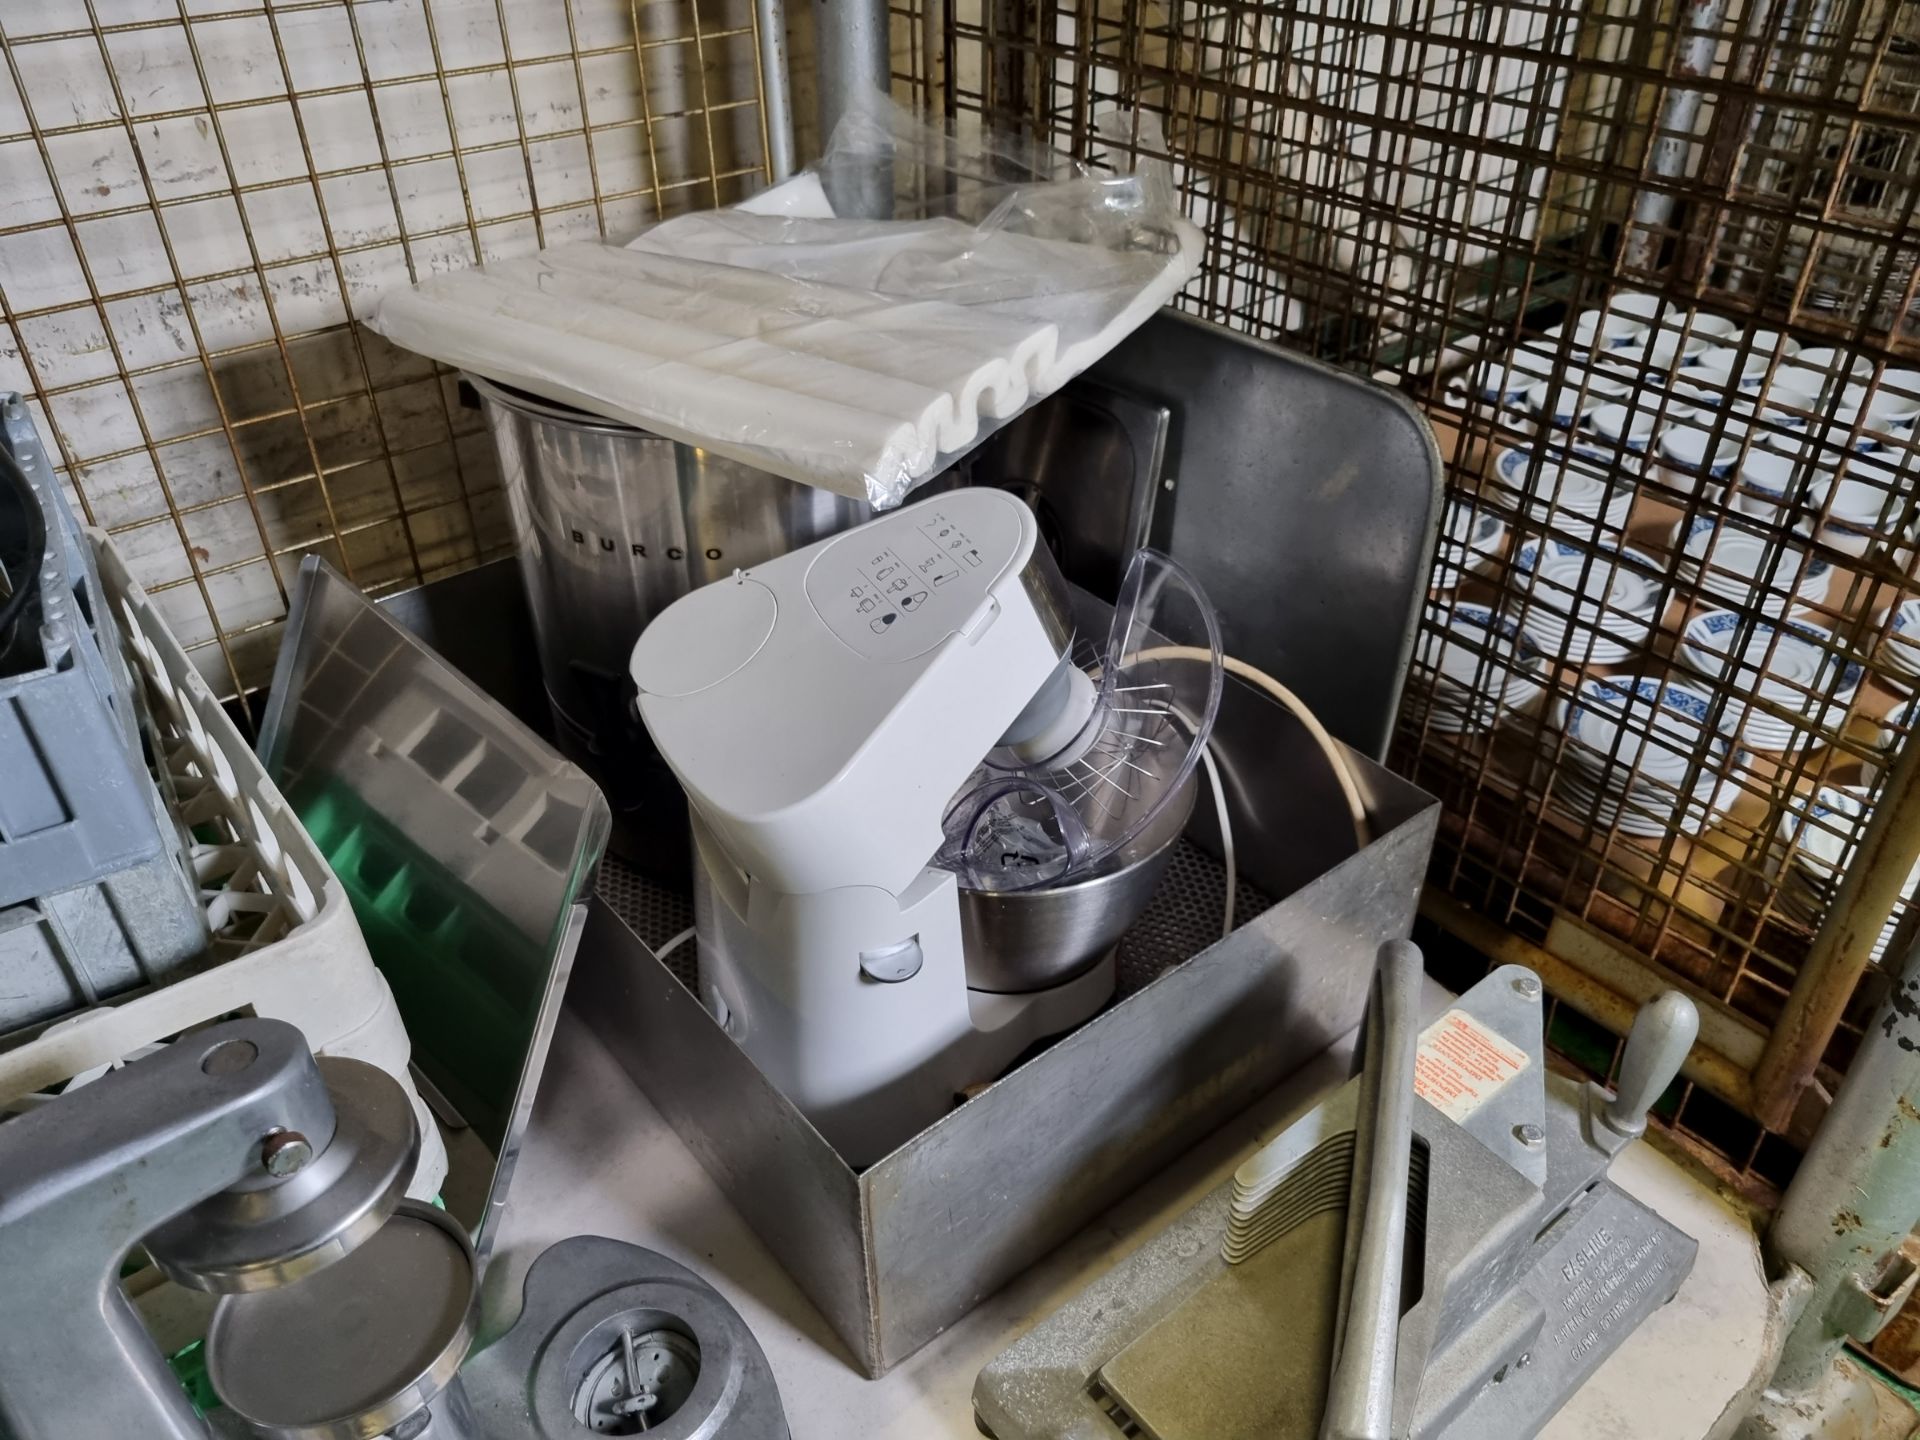 Catering equipment - dishwasher trays, food steamers, small mixer, tomato slicer, blender jug - Image 5 of 7